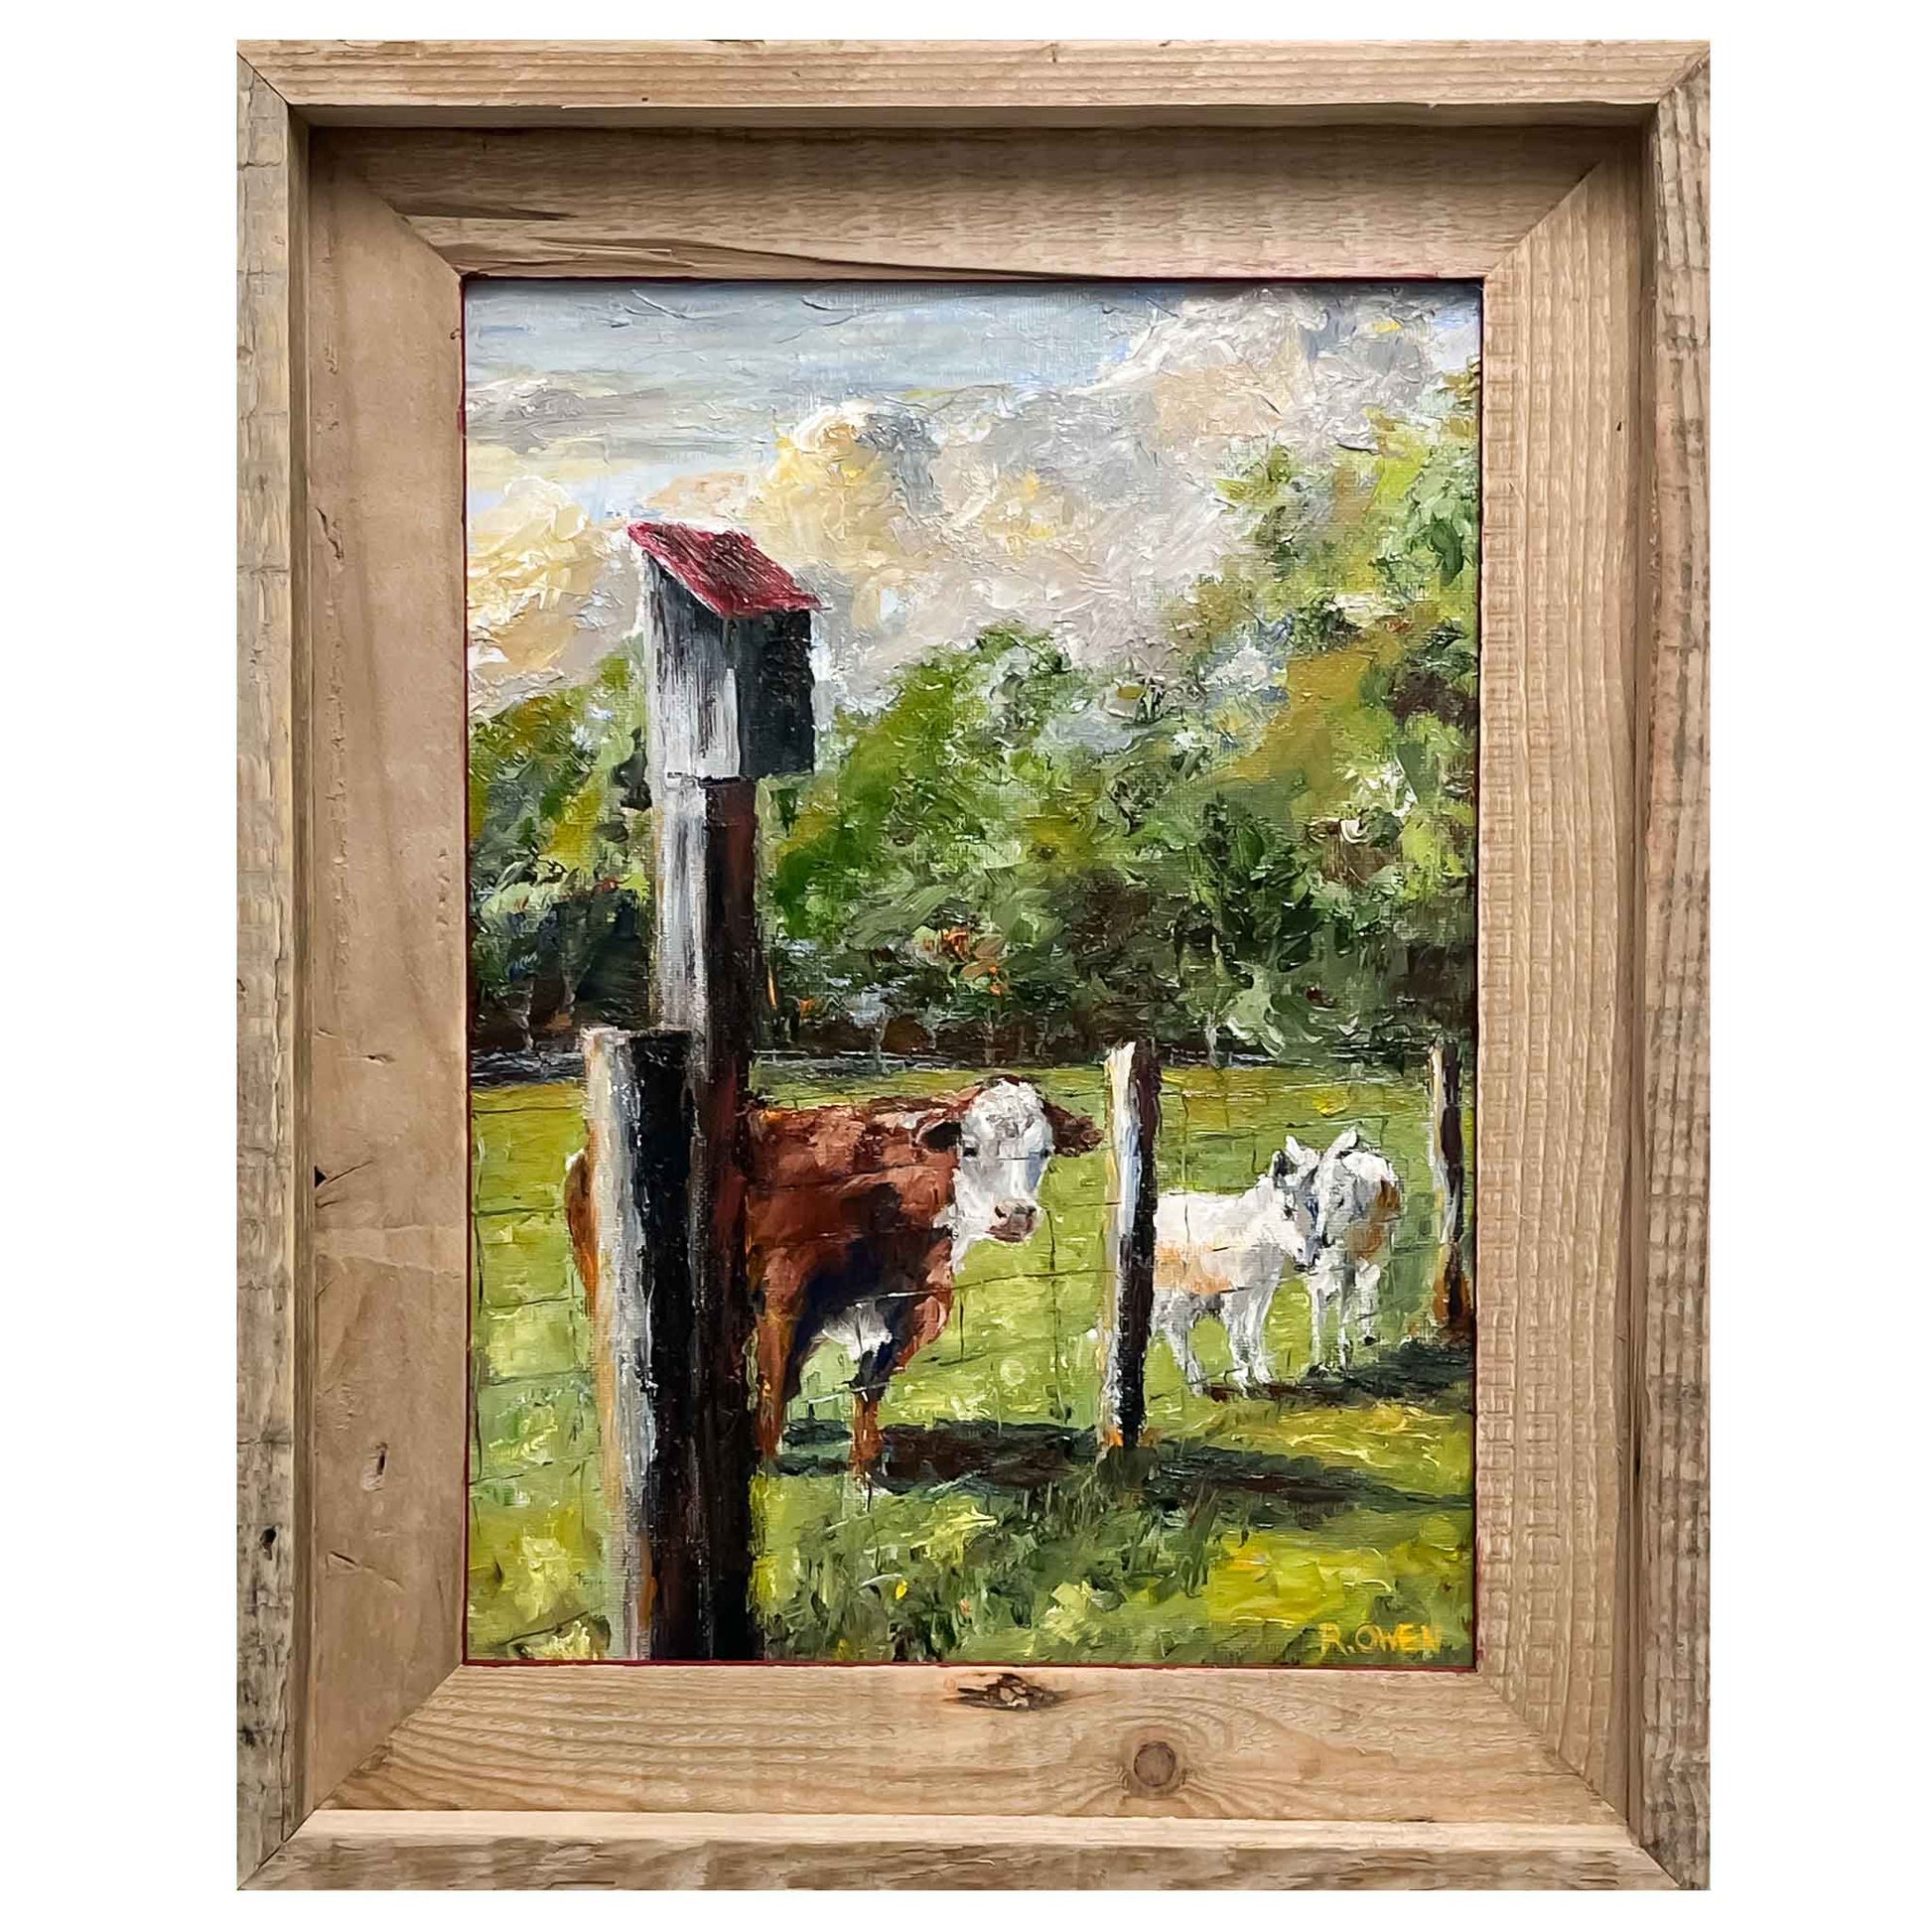 JRO Friends at the Fence Original Oil Painting by Artist Becky Owen.  Green pastures and majestic trees serve as a backdrop to this charming country scene.  A brown and white cow and two tiny donkeys wait by the fence beneath a wooden bird house.   They appear to be waiting  expectantly.  The pastel blue sky features building clouds.  Framed in a rustic wooden frame and ready to hang.  Measures 12 " x 15".  